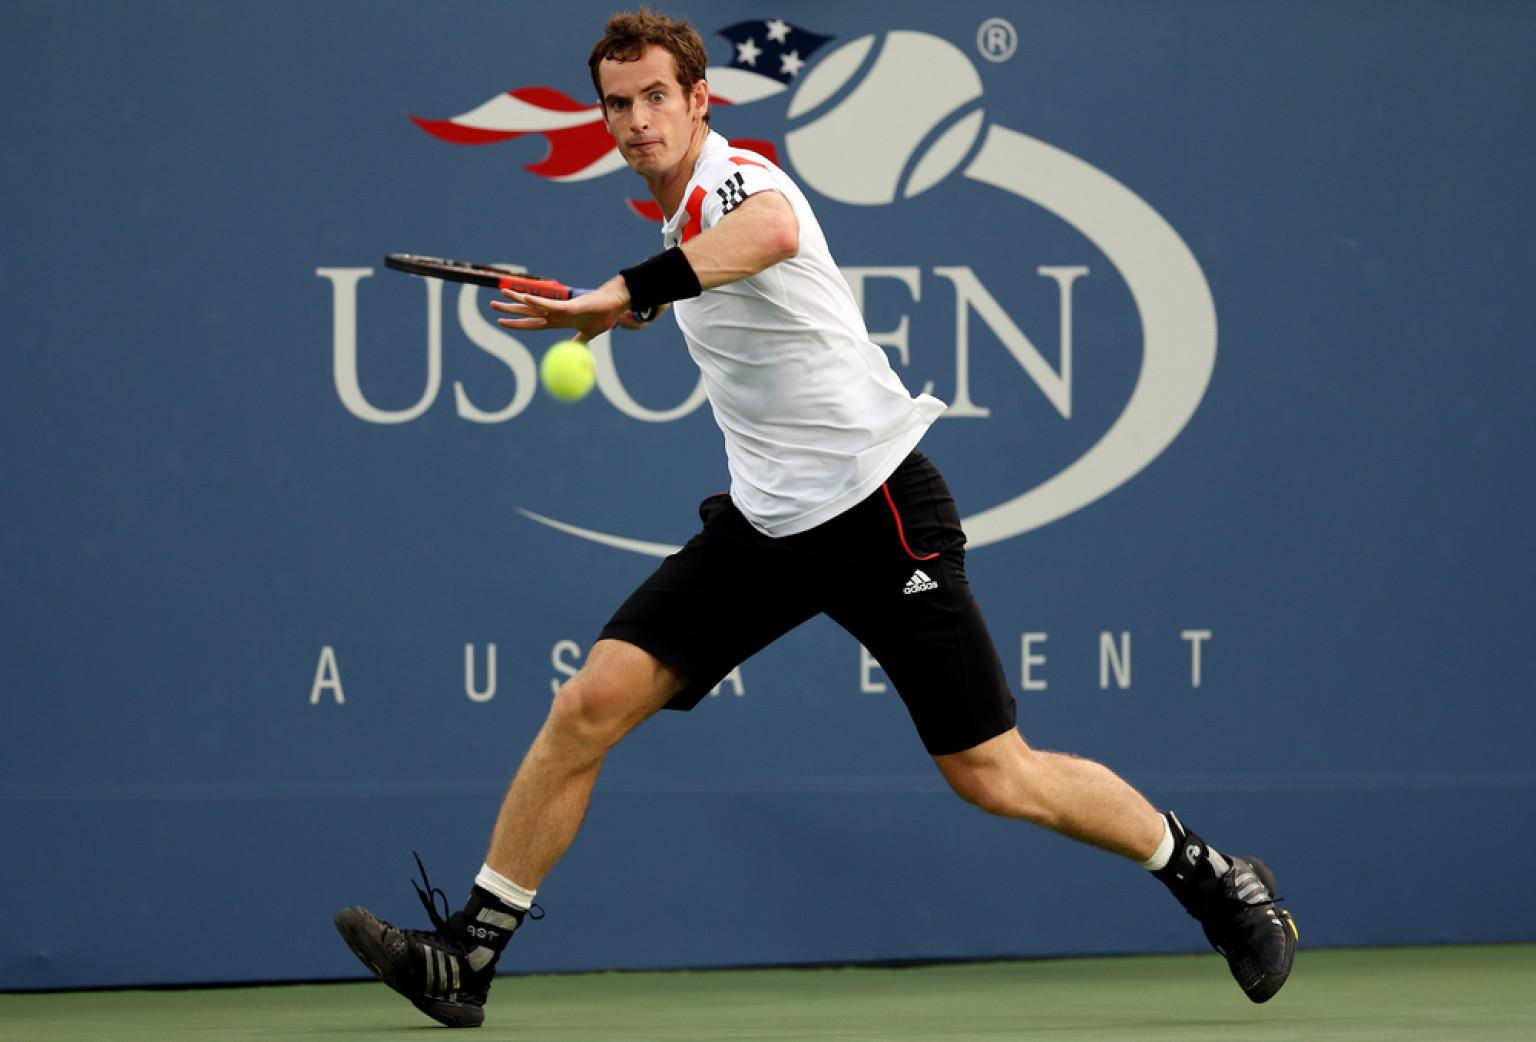 Andy Murray In Action At The Us Open Wallpaper